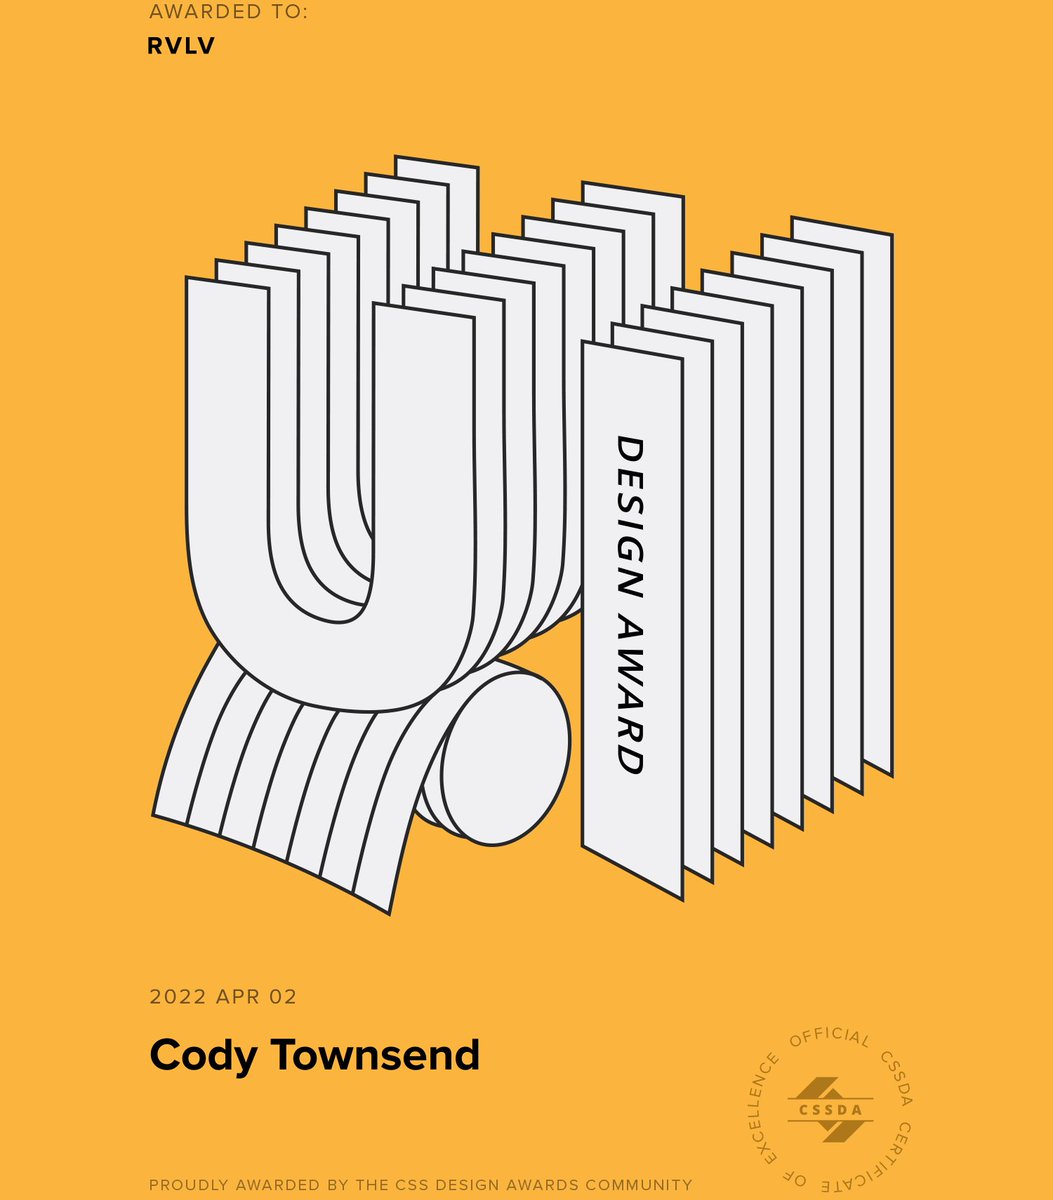 Super stoked to have received multiple awards for our design of the @codytownsend Website. Massive congratulations to all our design team for their awesome work! bit.ly/3Dq0Iik